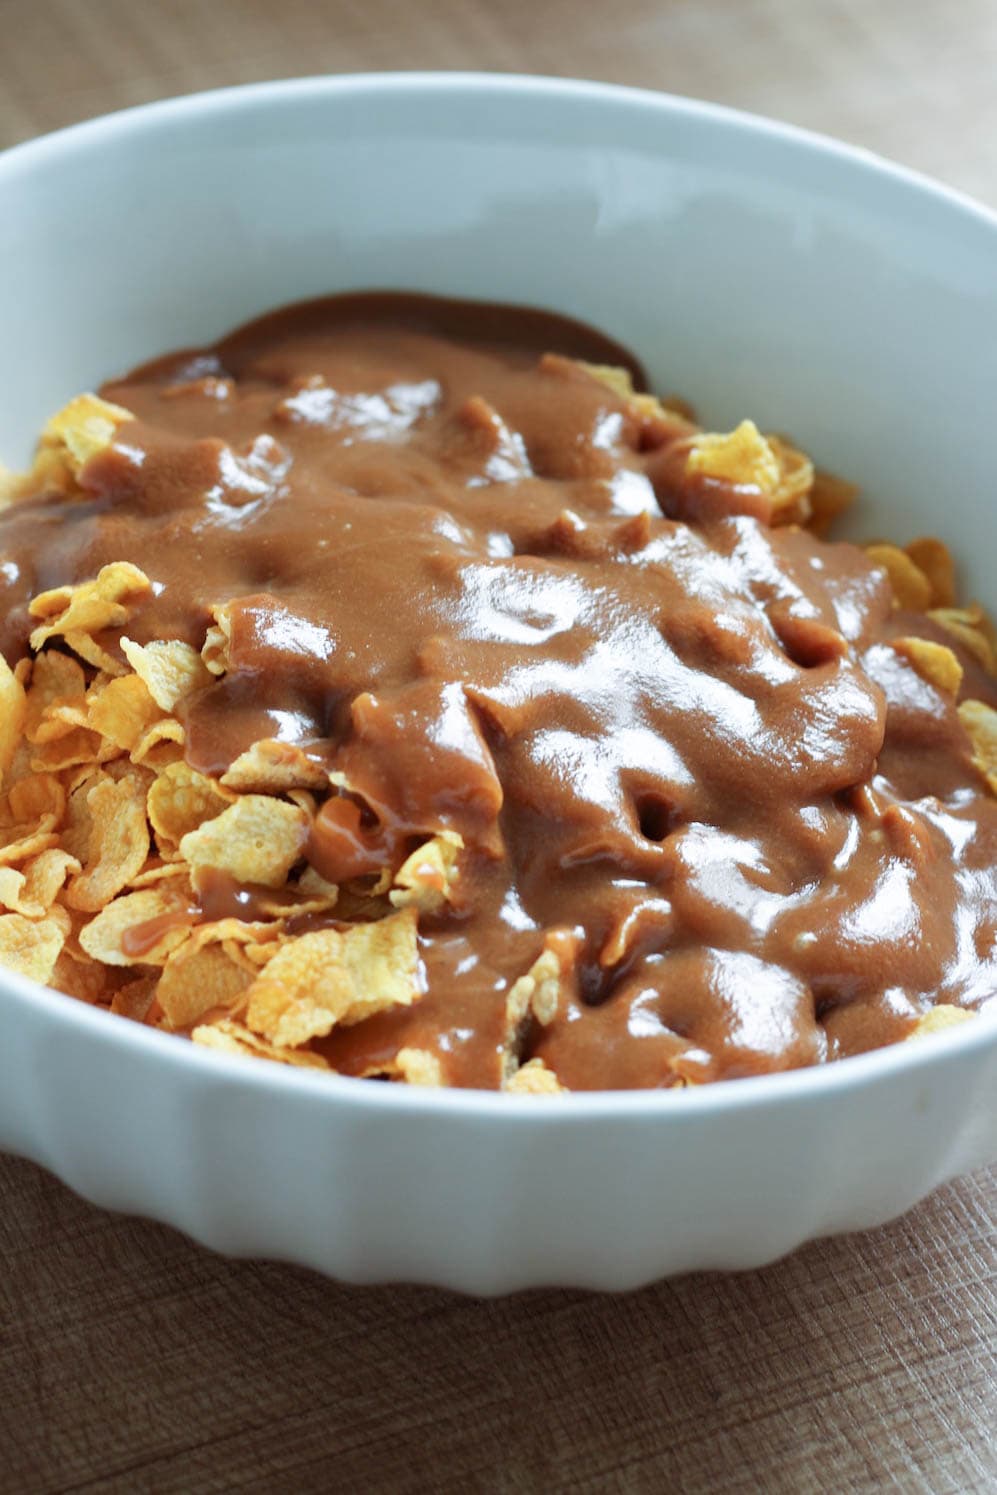 peanut butter sauce being mix into cornflakes